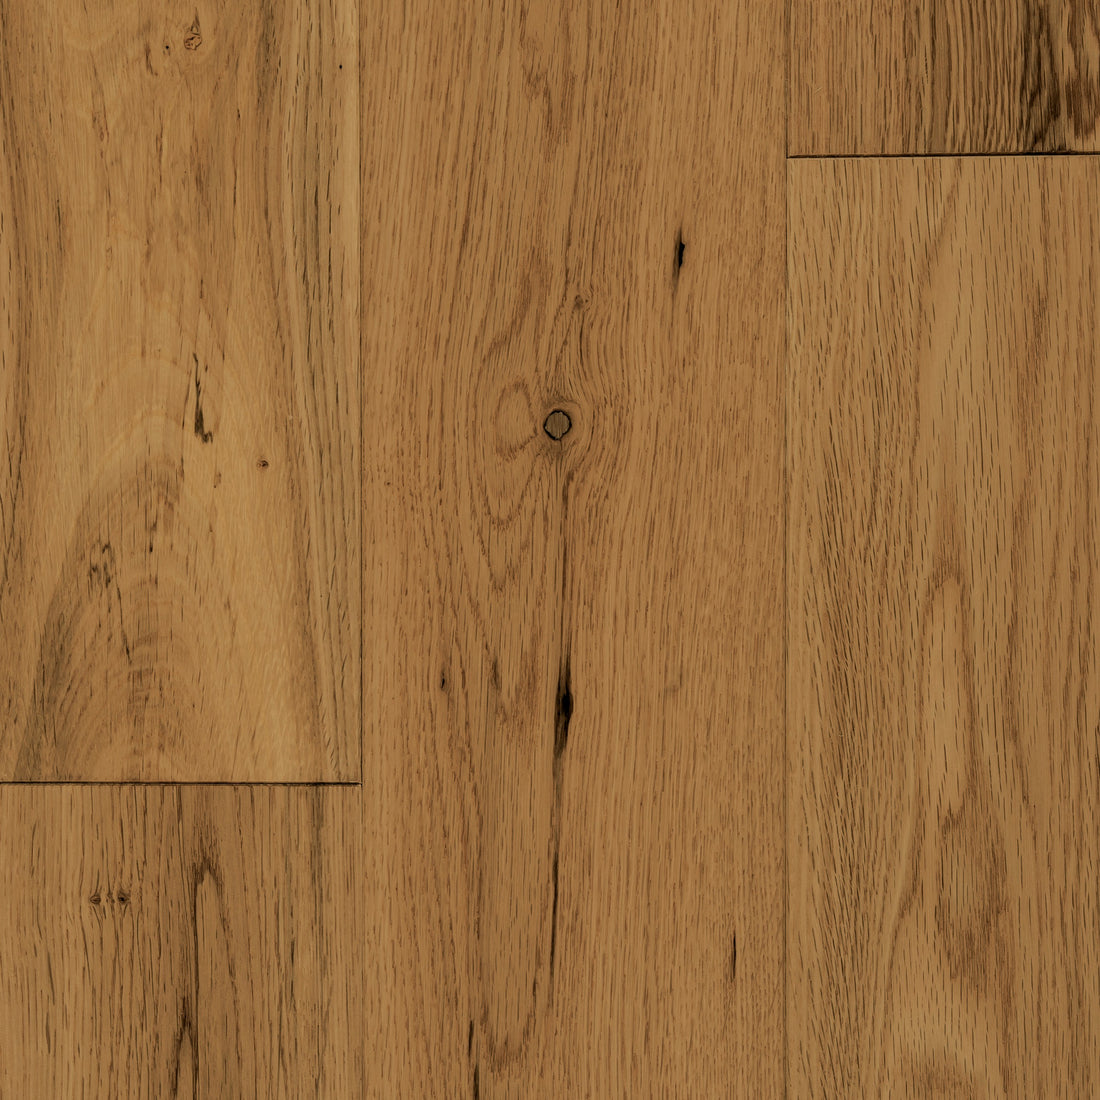 Tuscan Endure Rustic Oak Flat Sanded Lacquered TF20